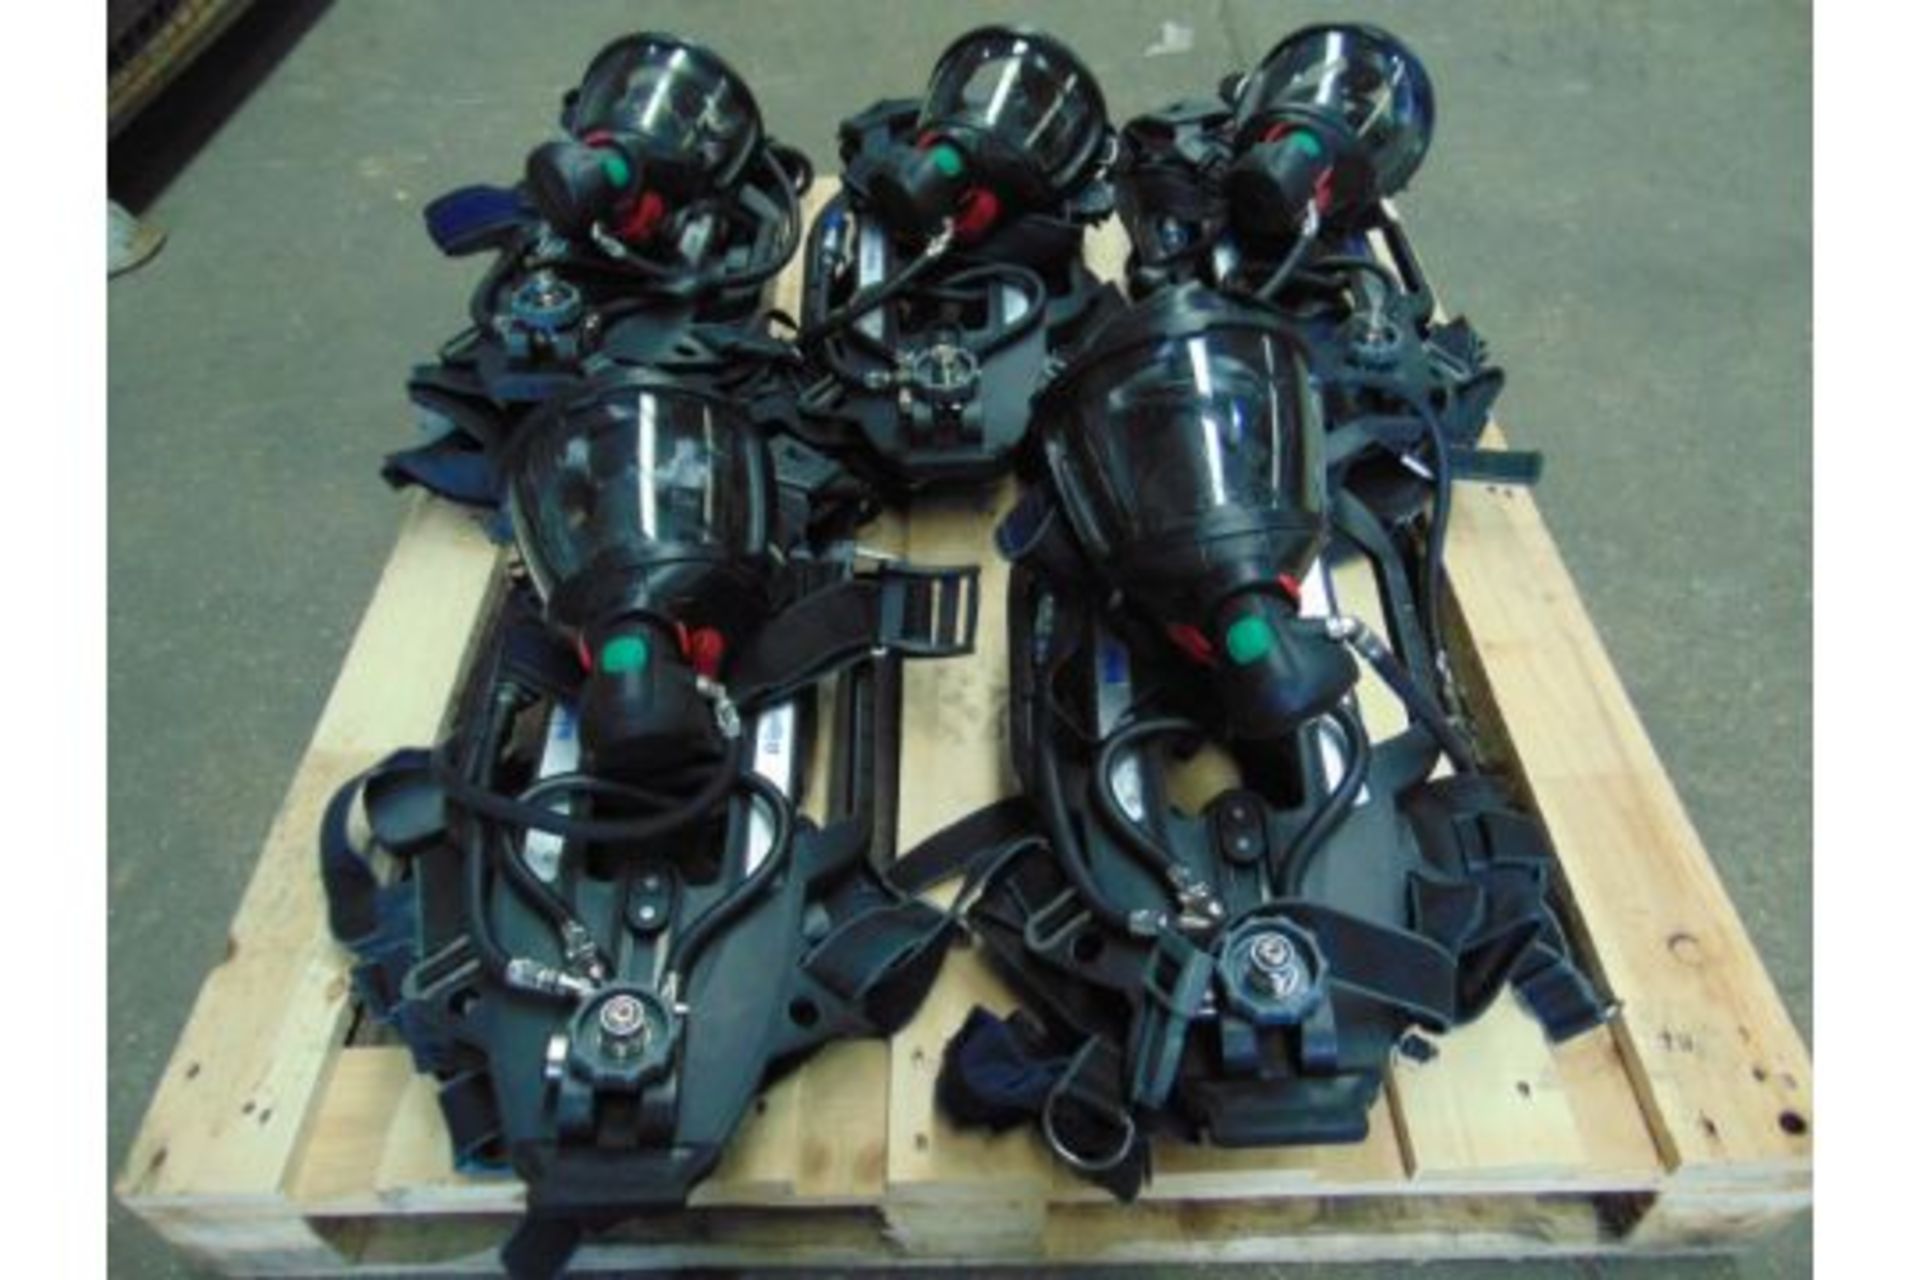 5 x Drager PSS 7000 Self Contained Breathing Apparatus w/ 10 x Drager 300 Bar Air Cylinders - Image 7 of 20